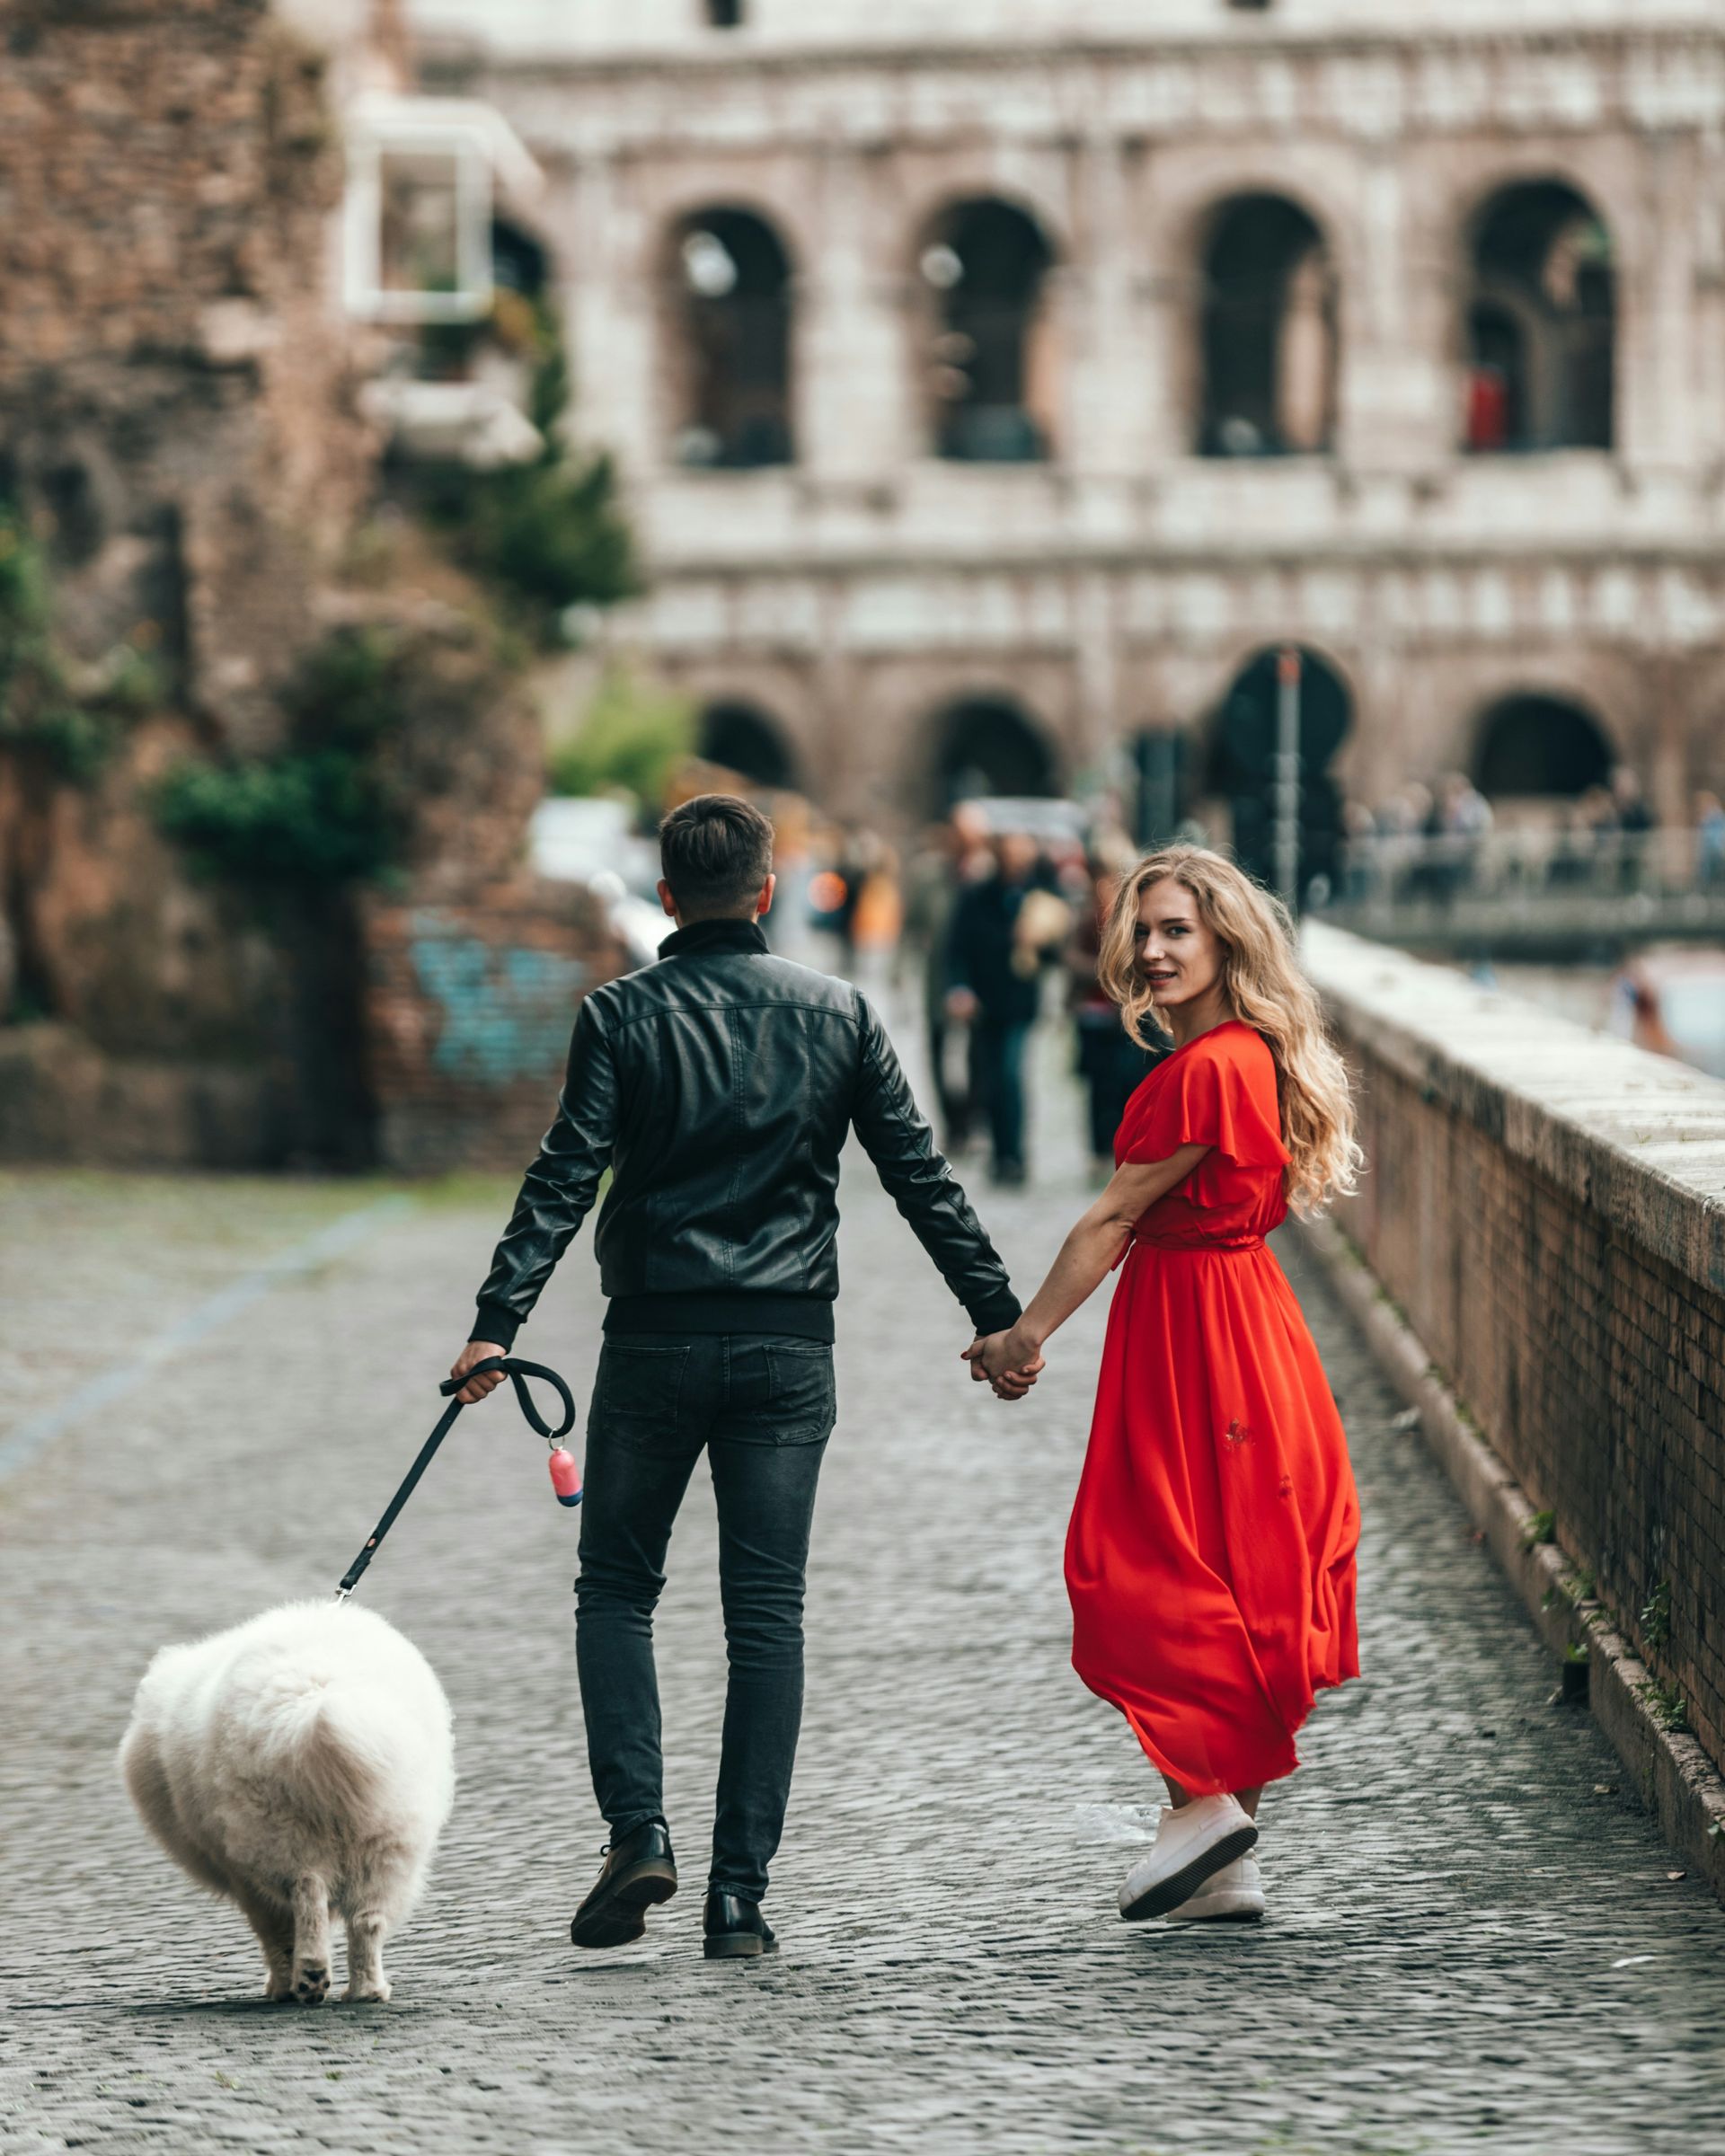 Couple with a dog walking in the street